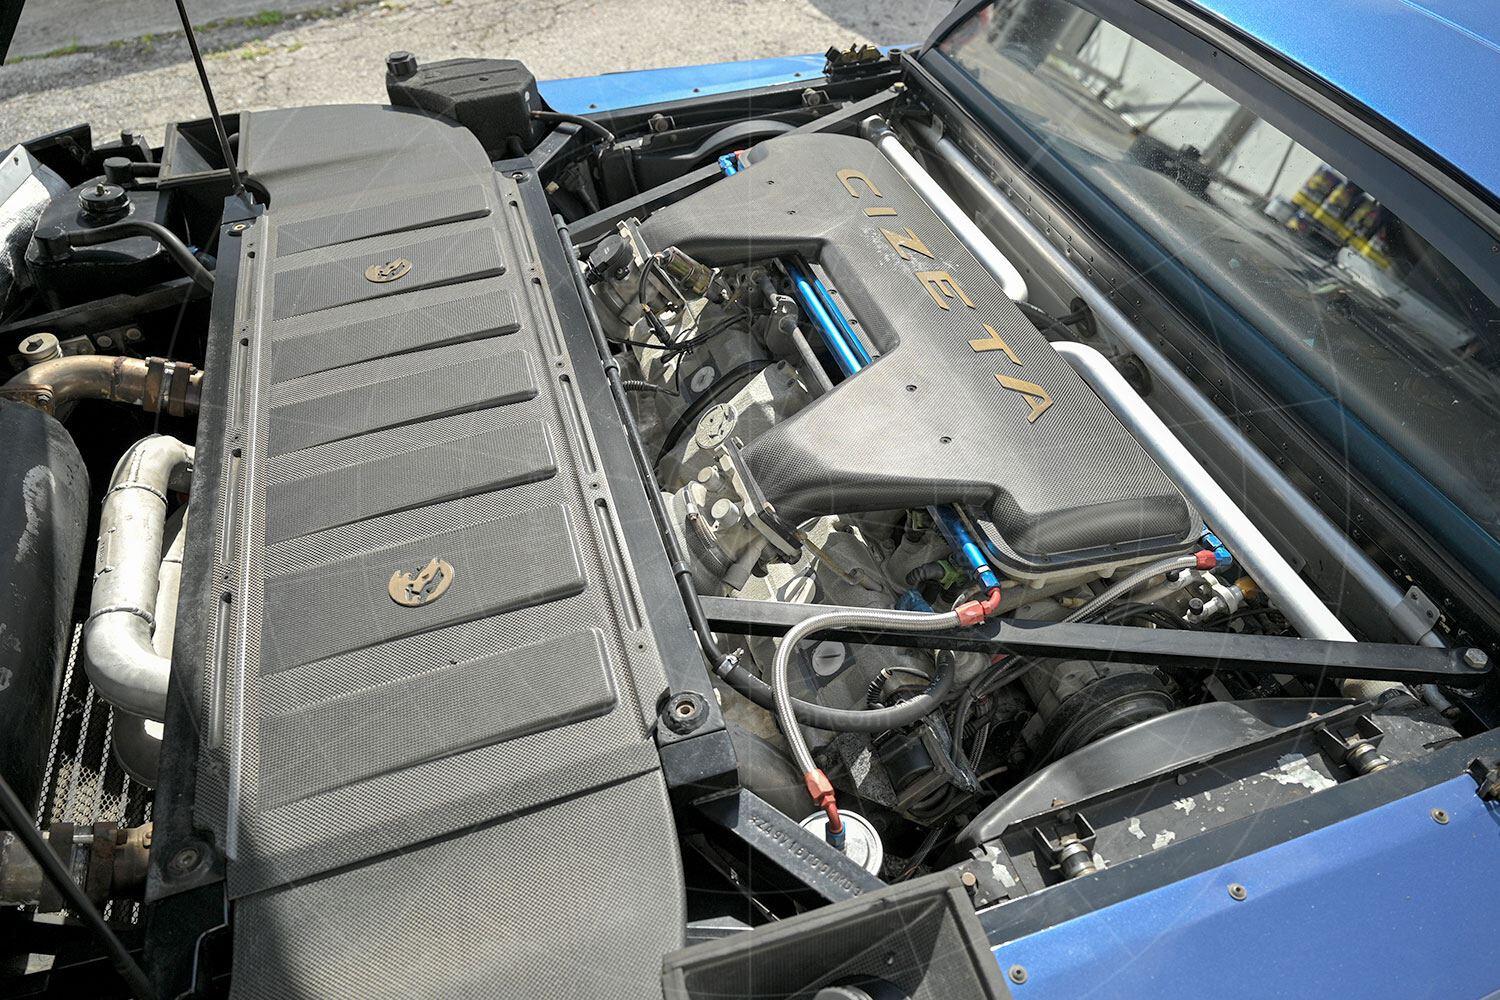 The Cizeta V16T's engine bay Pic: RM Sotheby's | The Cizeta V16T's engine bay